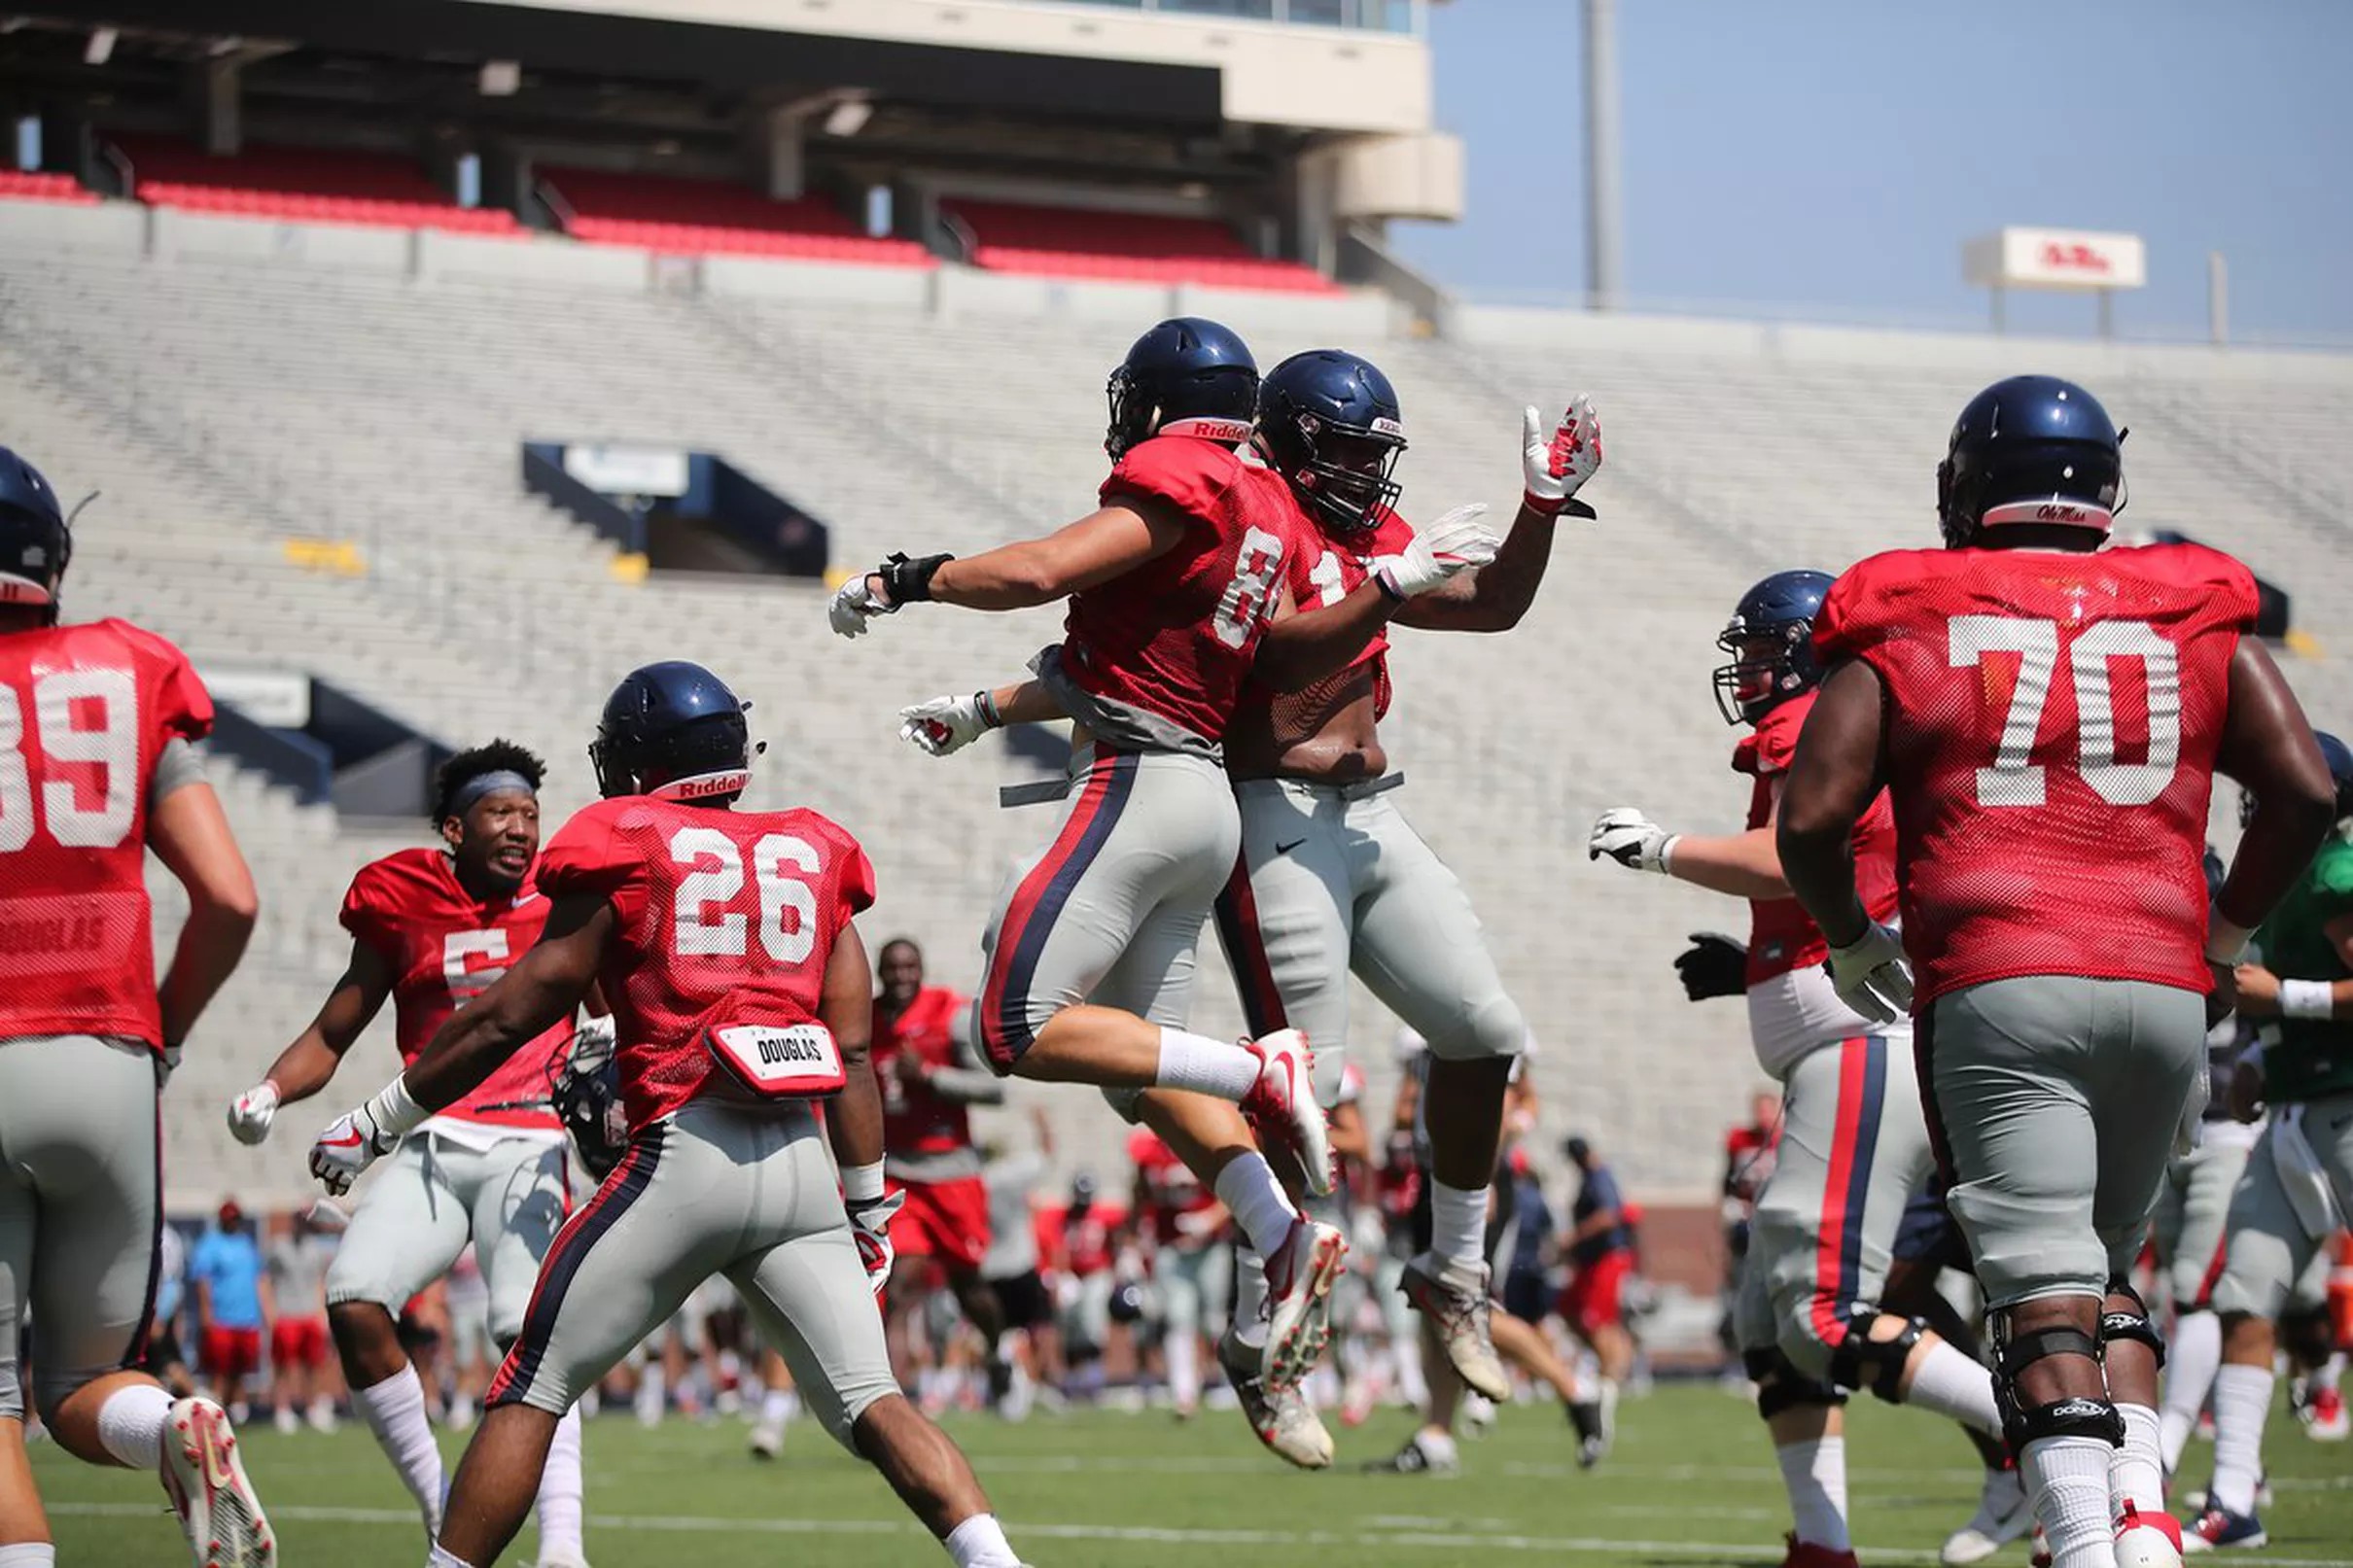 Here’s Ole Miss’ depth chart heading into the Texas Tech game